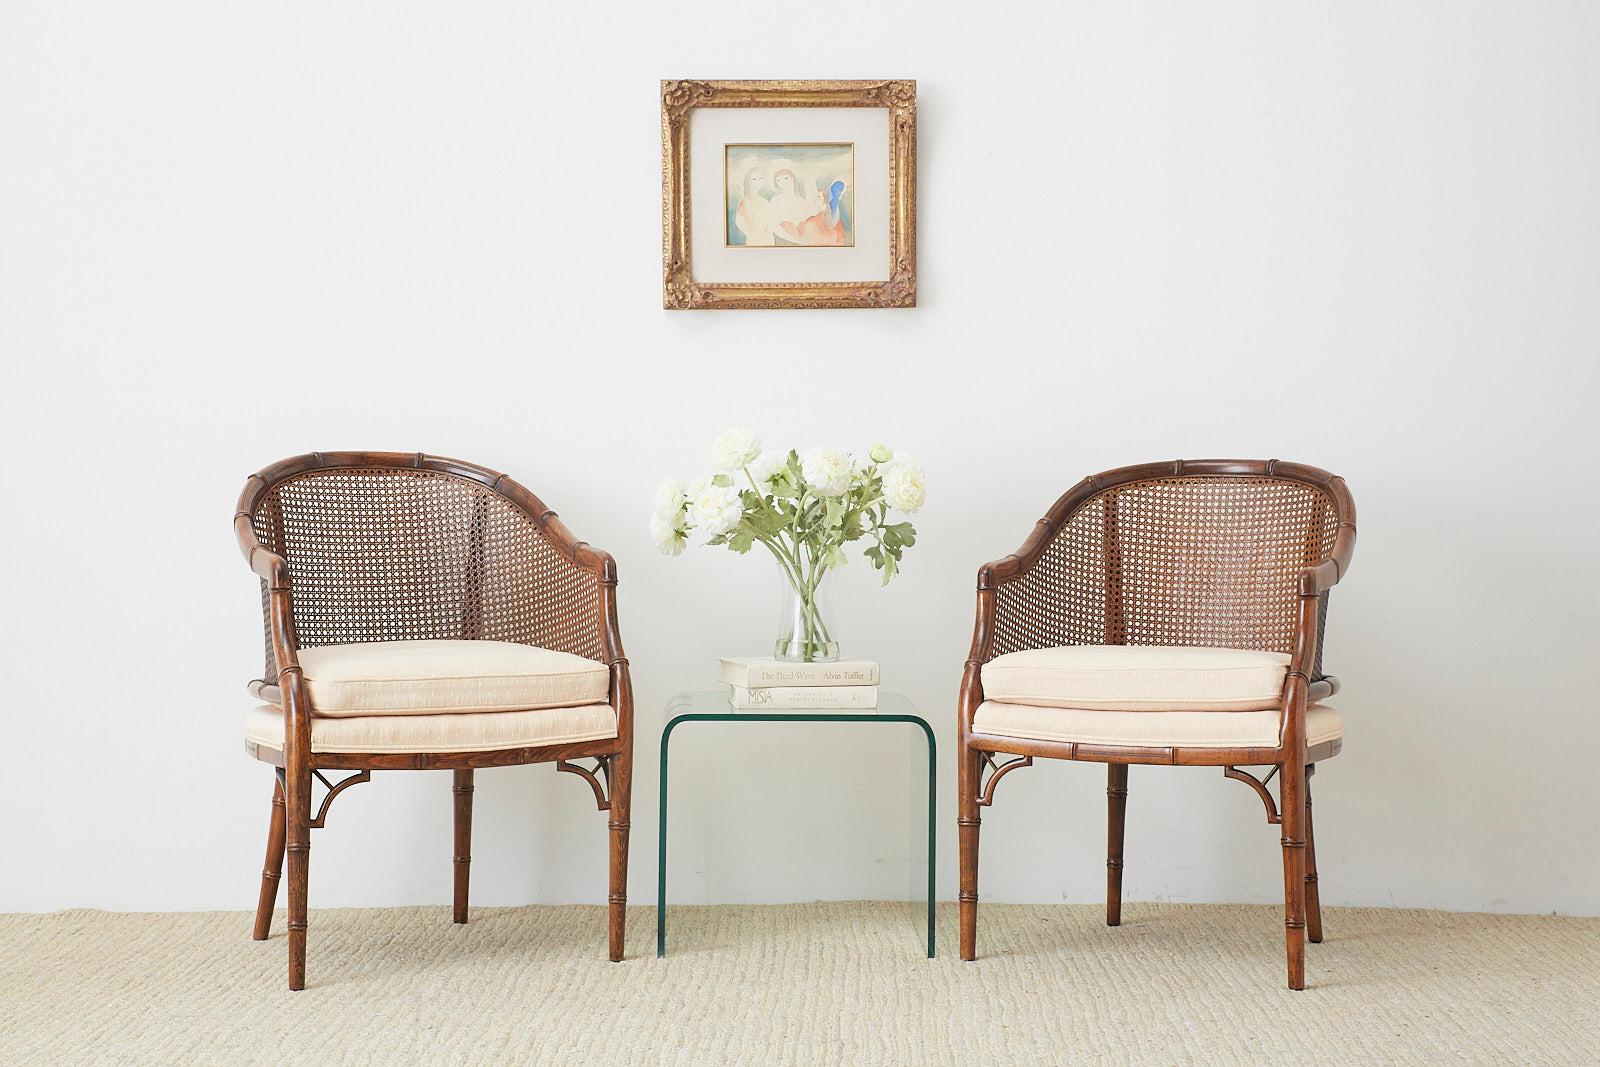 Exceptional pair of Mid-Century Modern barrel chairs by Century Furniture. Featuring a handcrafted faux-bamboo wooden frame with a caned back and sides. Made in the Hollywood Regency style with a loose seat cushion. Excellent joinery and finish from